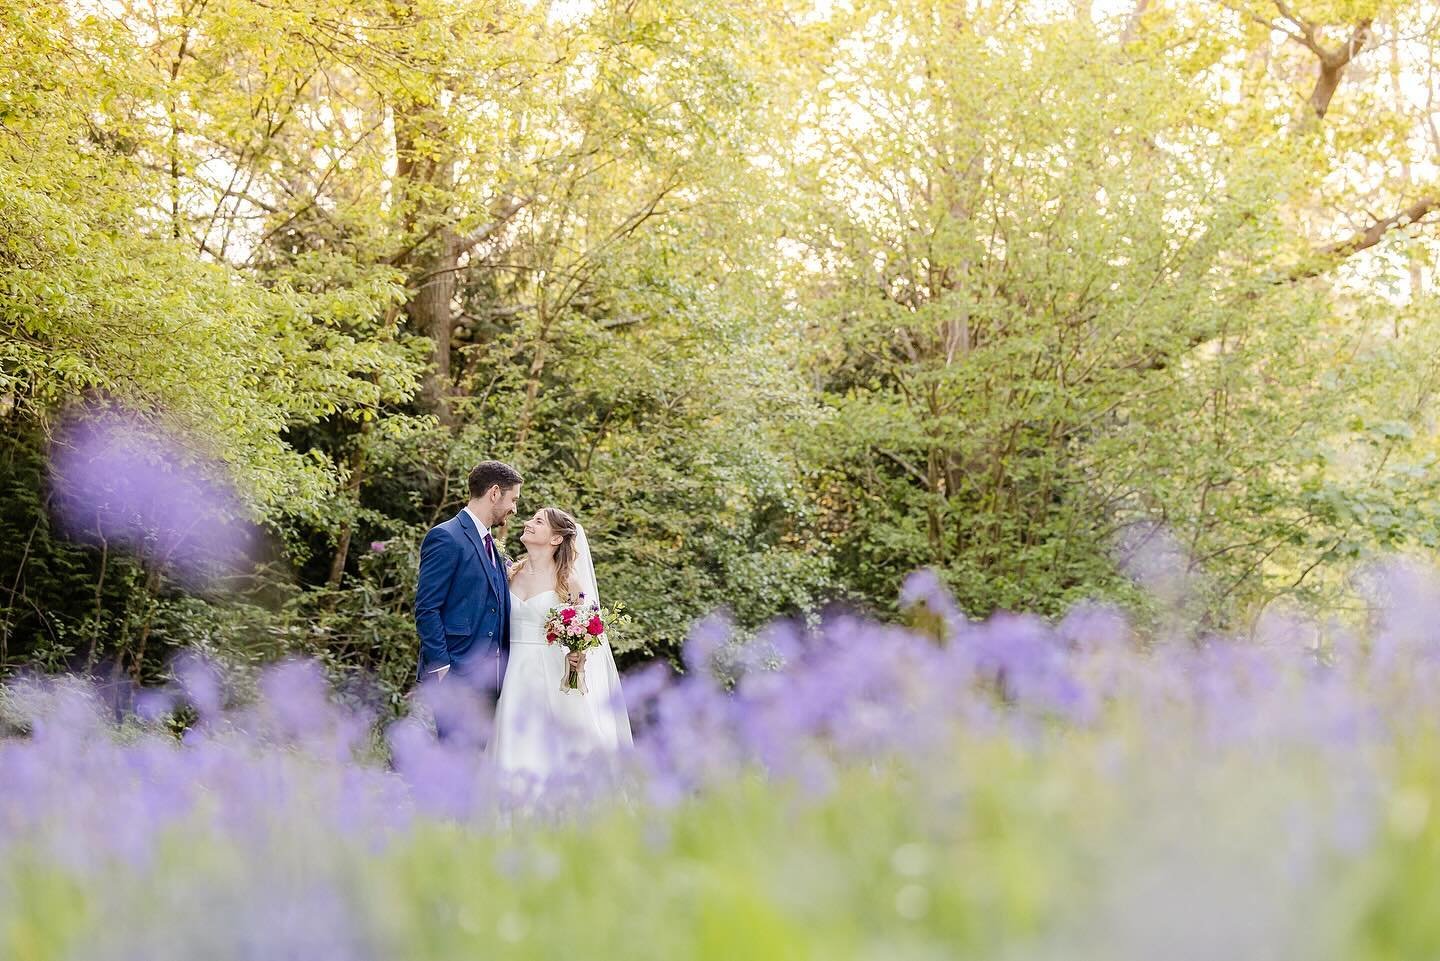 What an incredible day we had on Sunday! It was an absolute joy to photograph Sheree and Lawrence, who radiated happiness all day long. My lovely couple celebrated at High Rocks, which has a magical quality to it in late spring. Nature is waking up, 